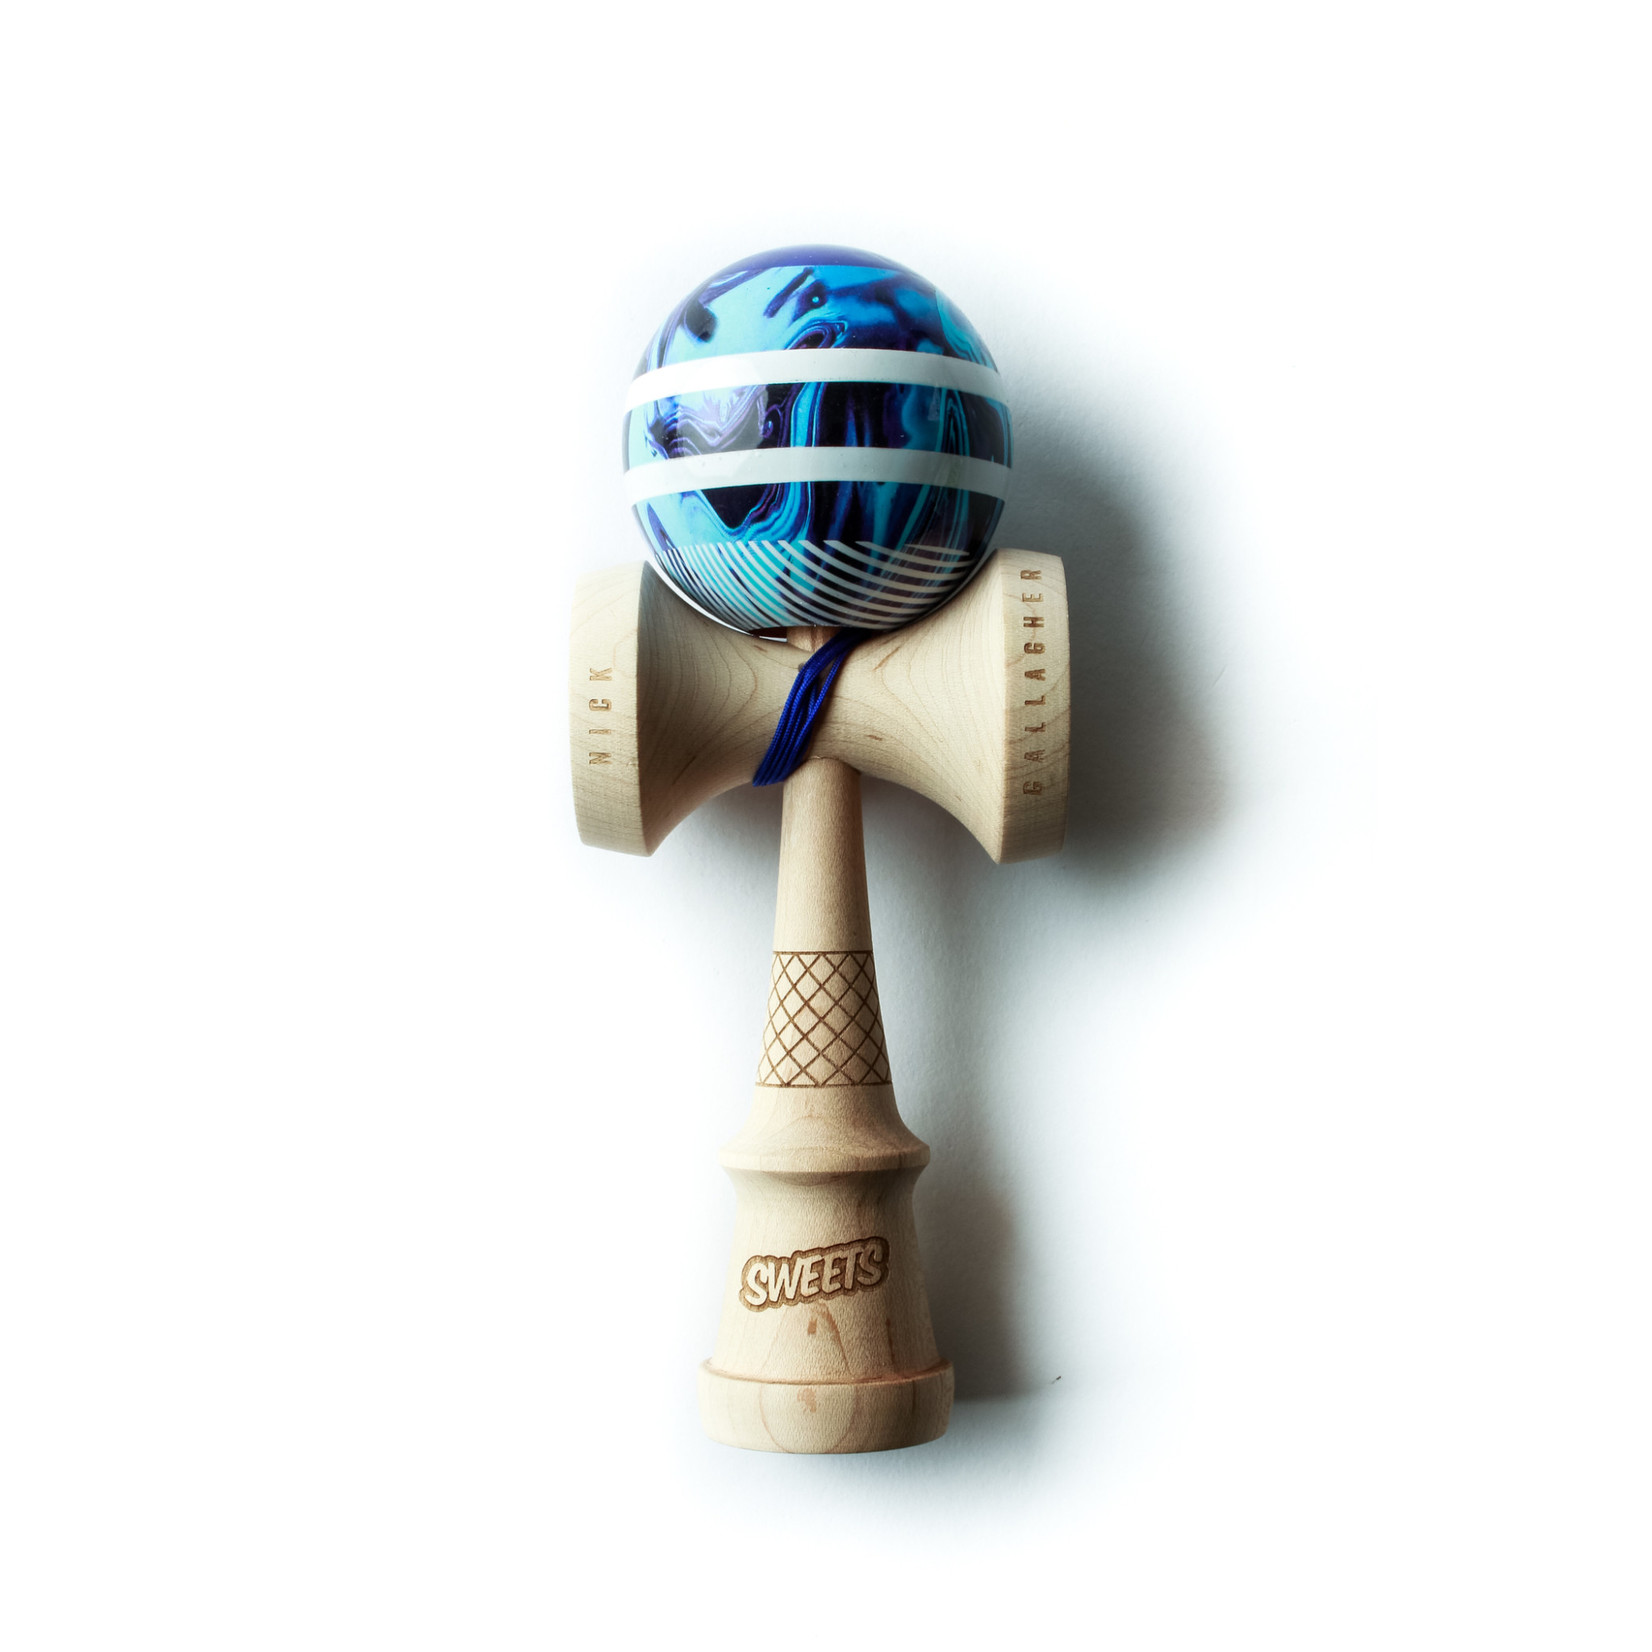 Sweets Kendamas Nick Gallagher